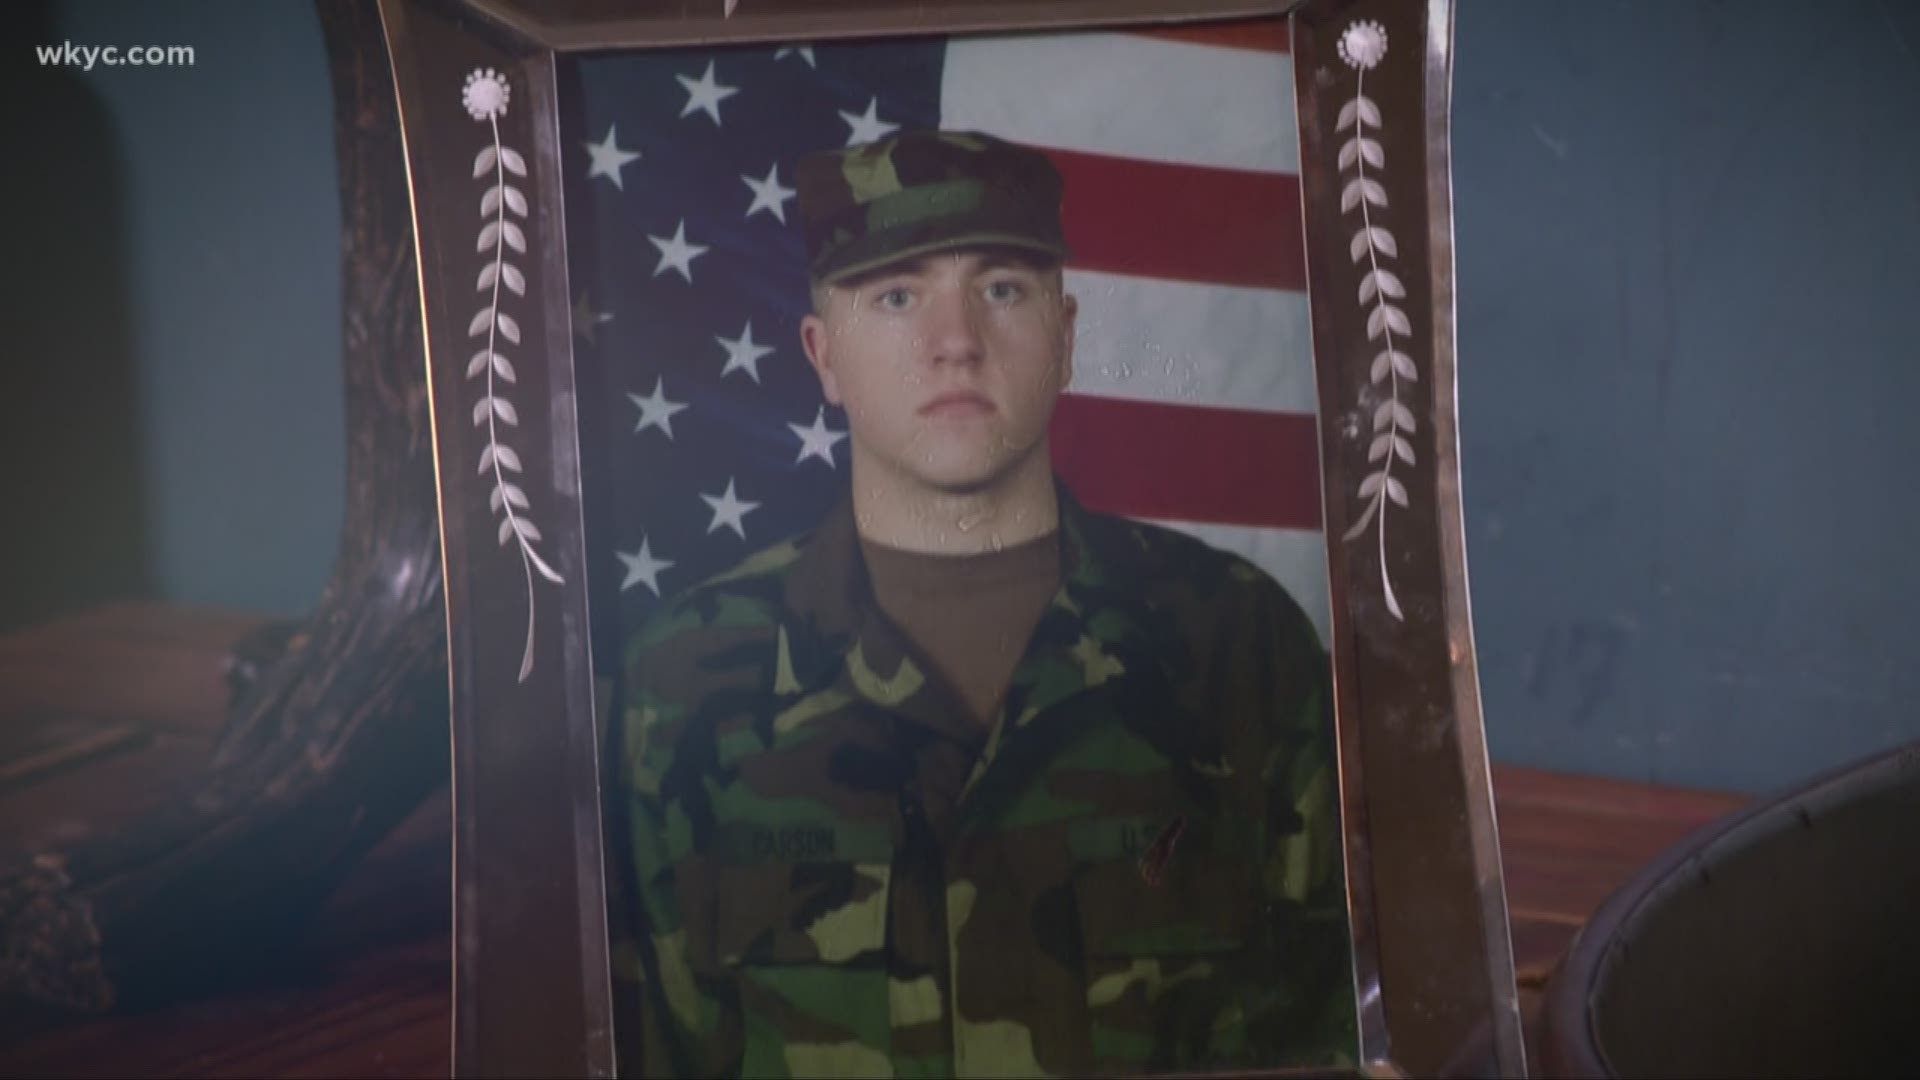 Army Cpl. Joseph Carson came home to Portage County from Iraq with a Purple Heart. PTSD came along, too. And it all changed his life and the lives of his wife and seven children.